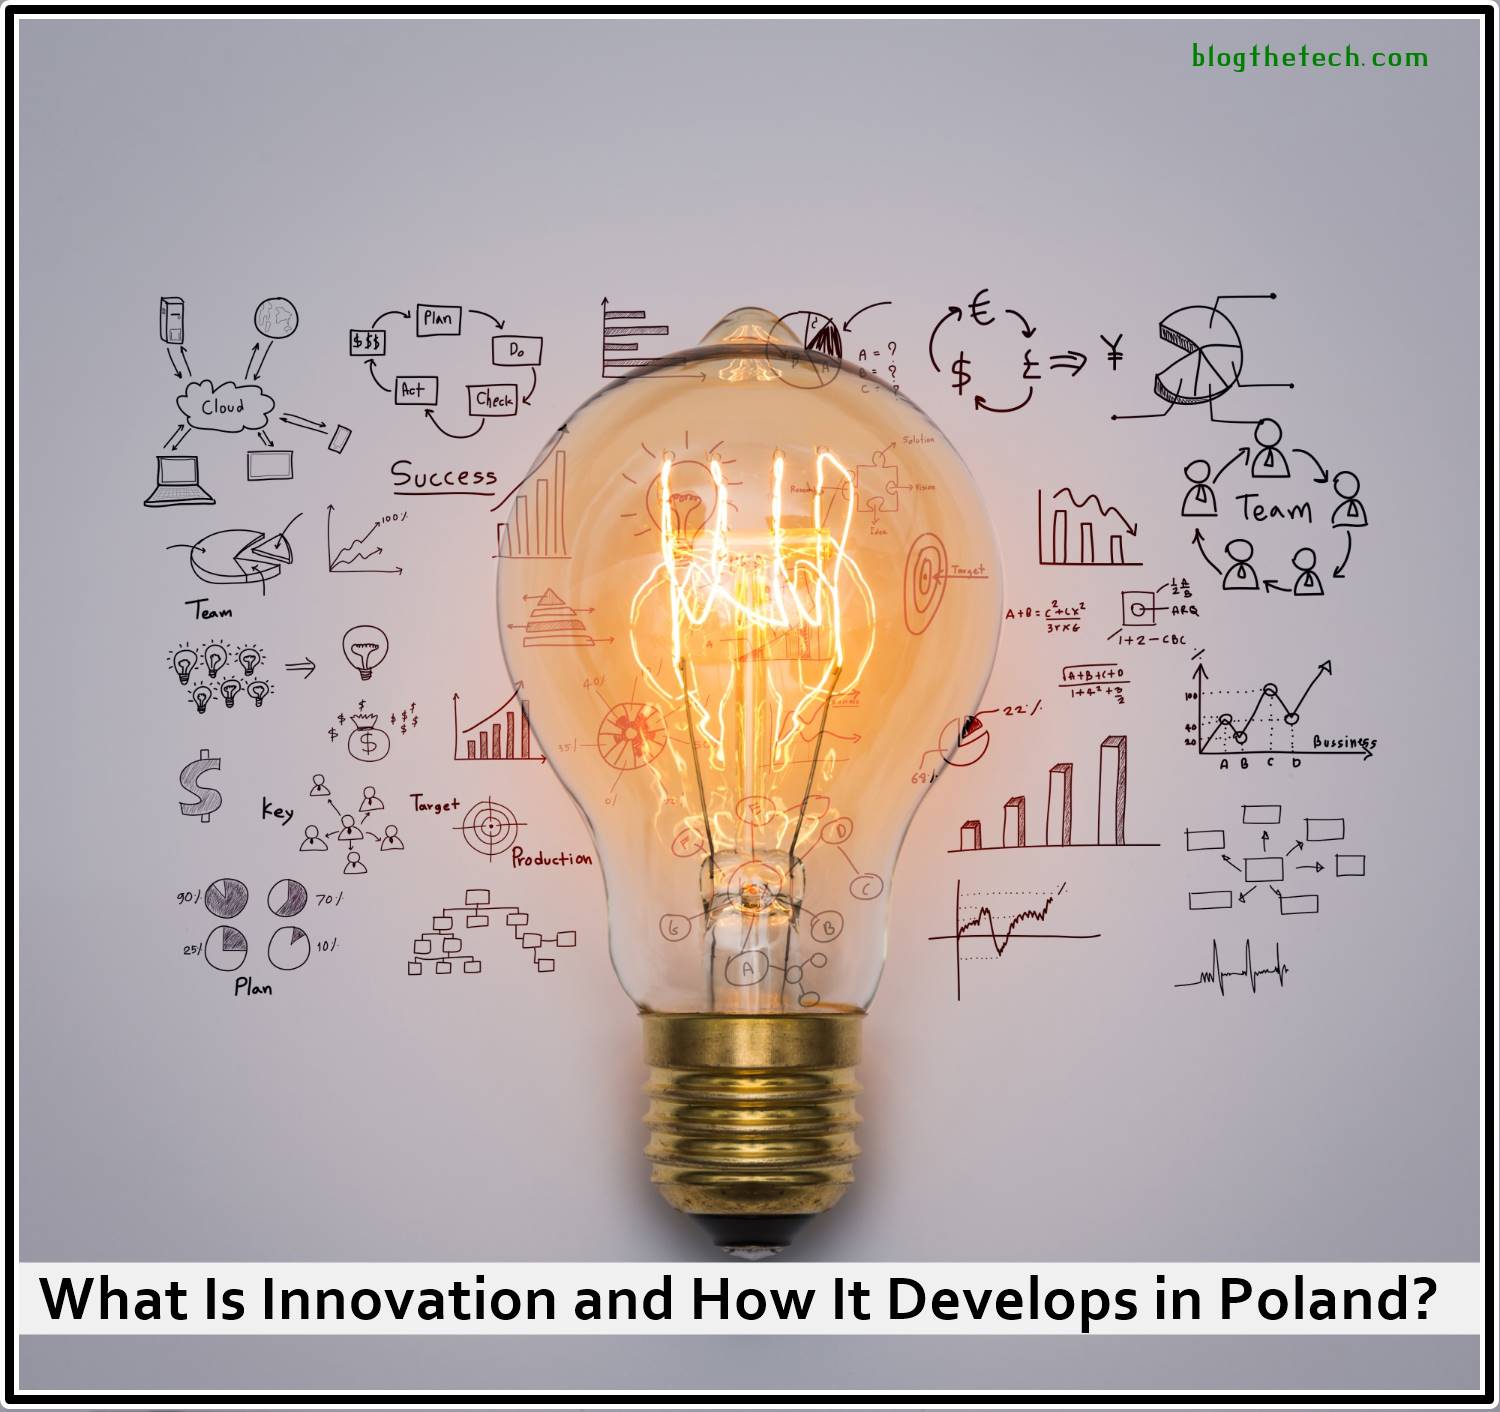 What Is Innovation and How It Develops in Poland?